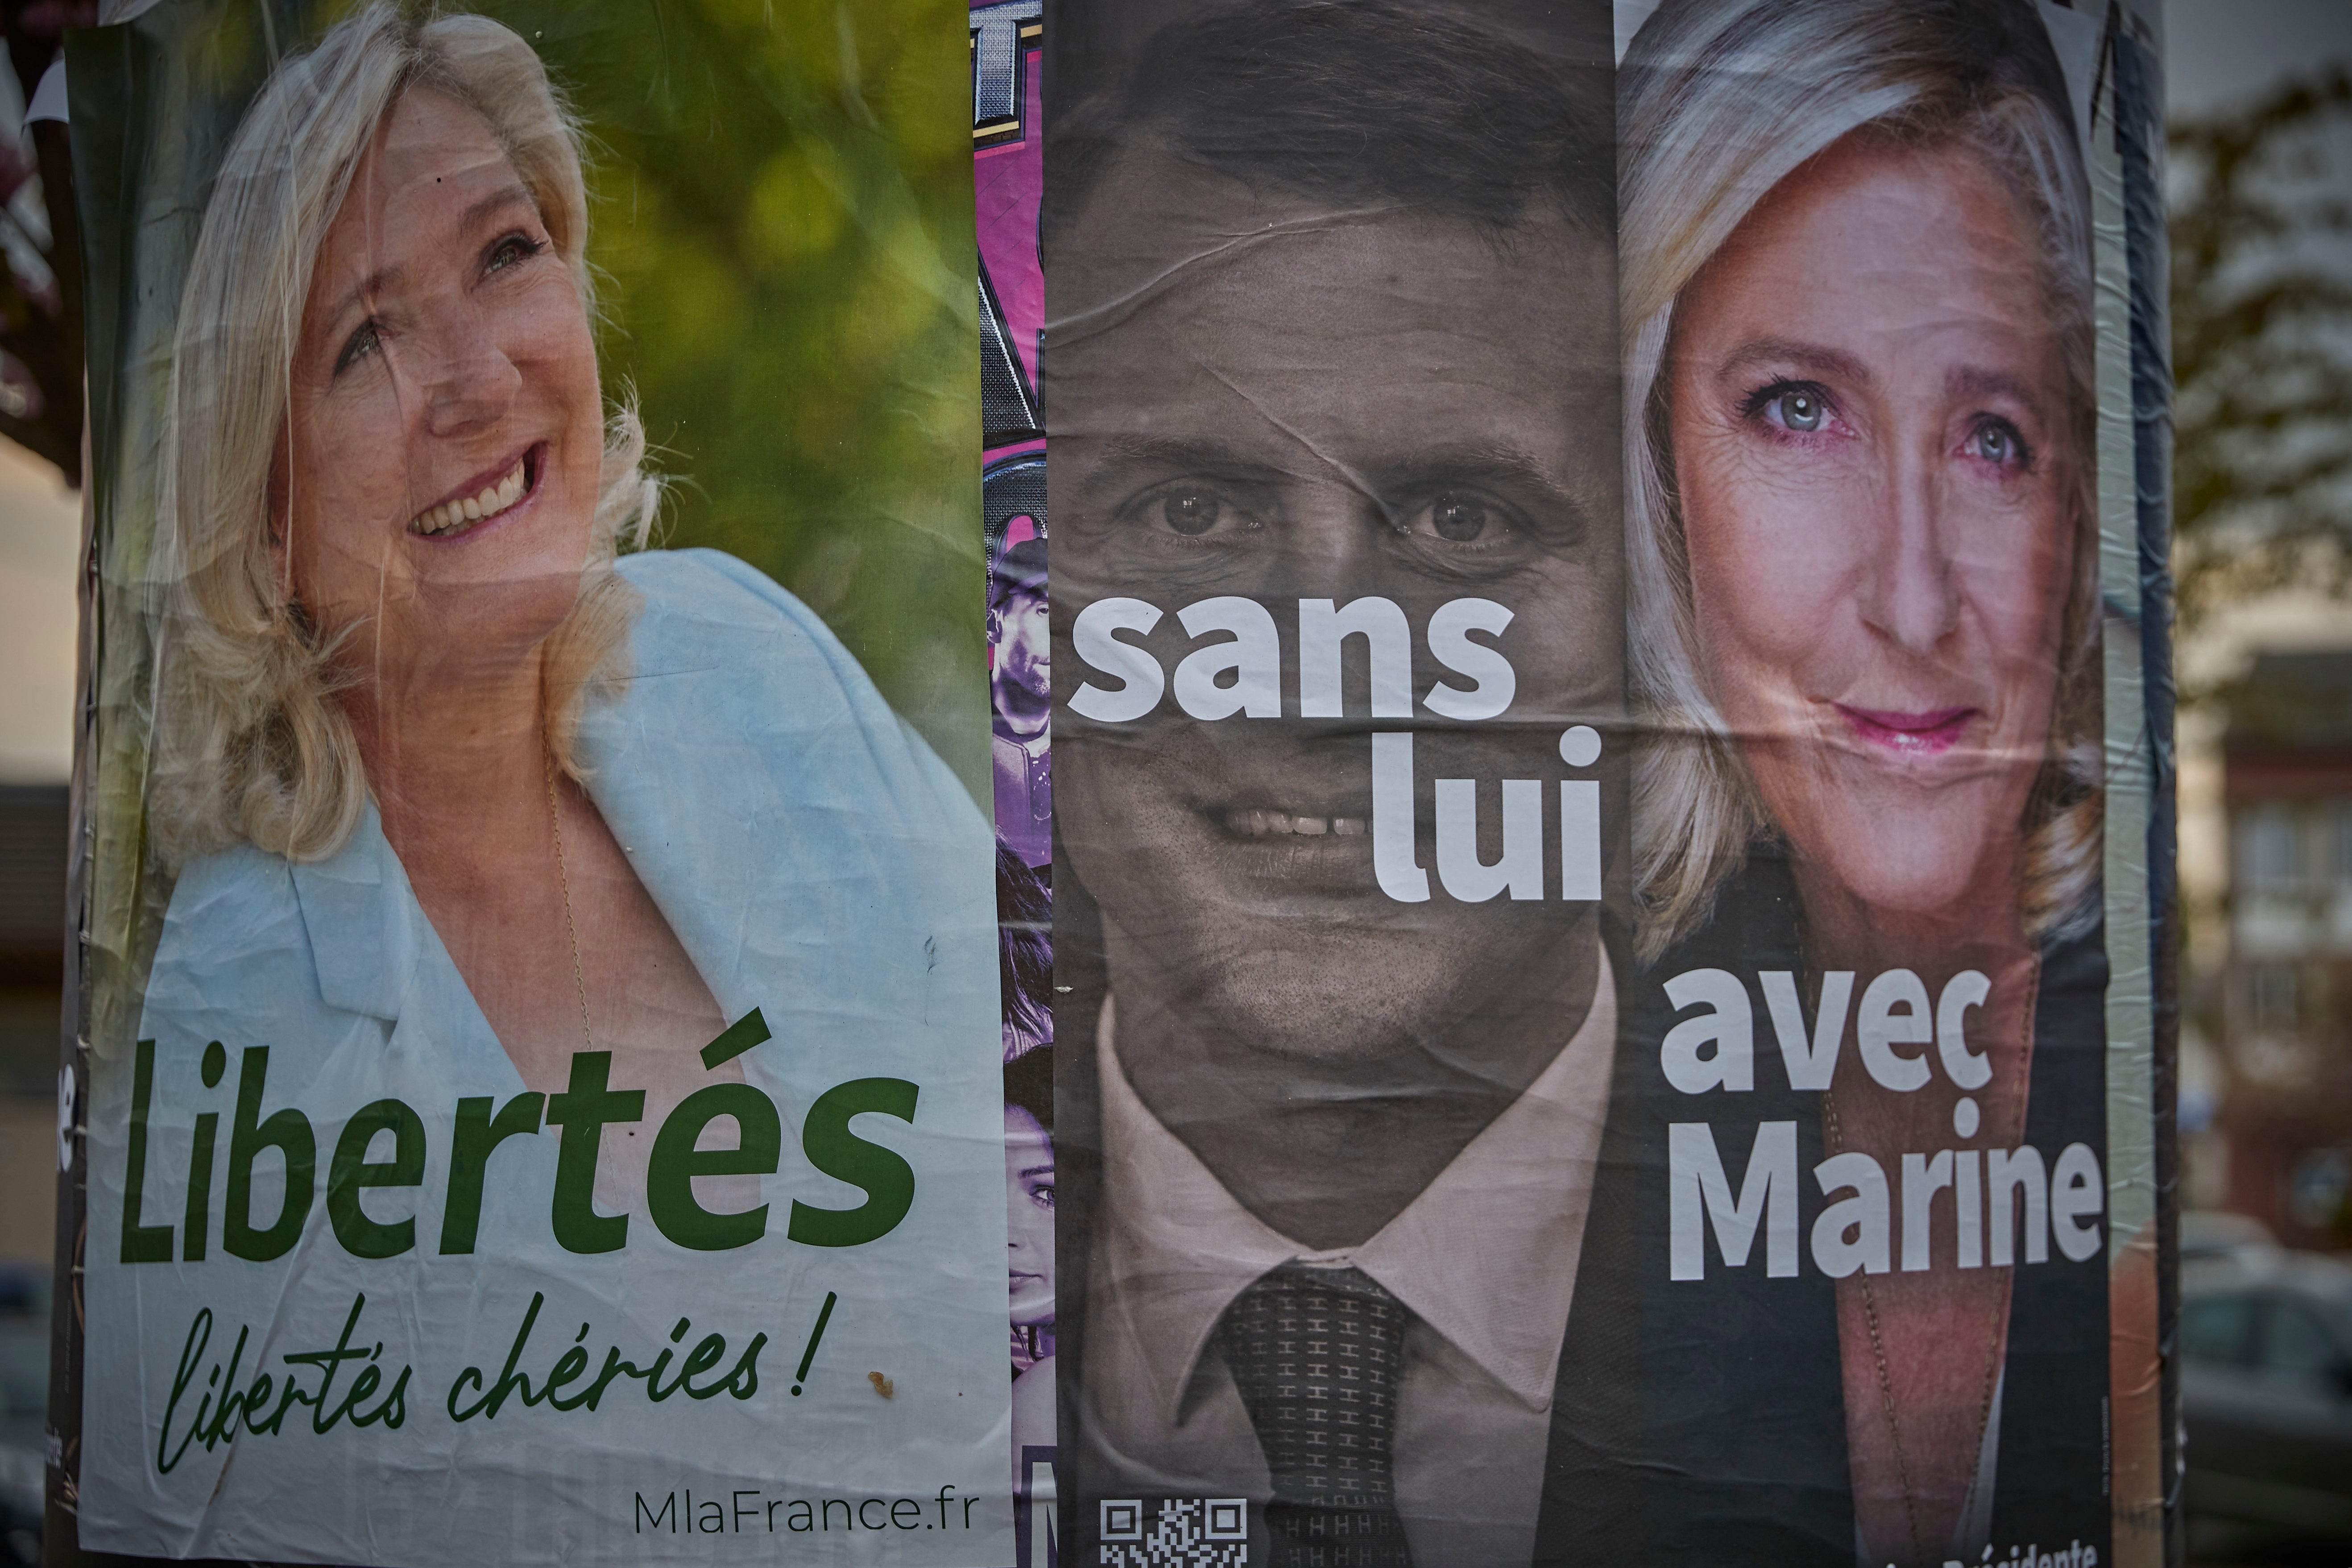 Election campaign posters for Presidential Candidate Marine Le Pen in the town of Abbeville